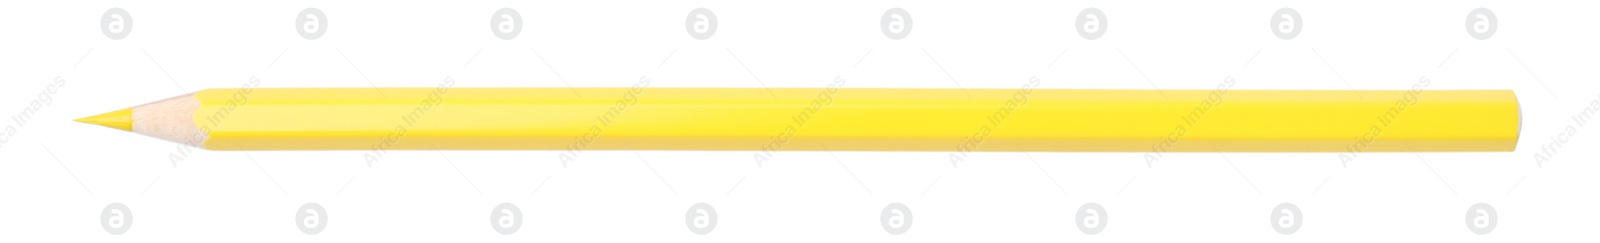 Photo of New yellow wooden pencil isolated on white